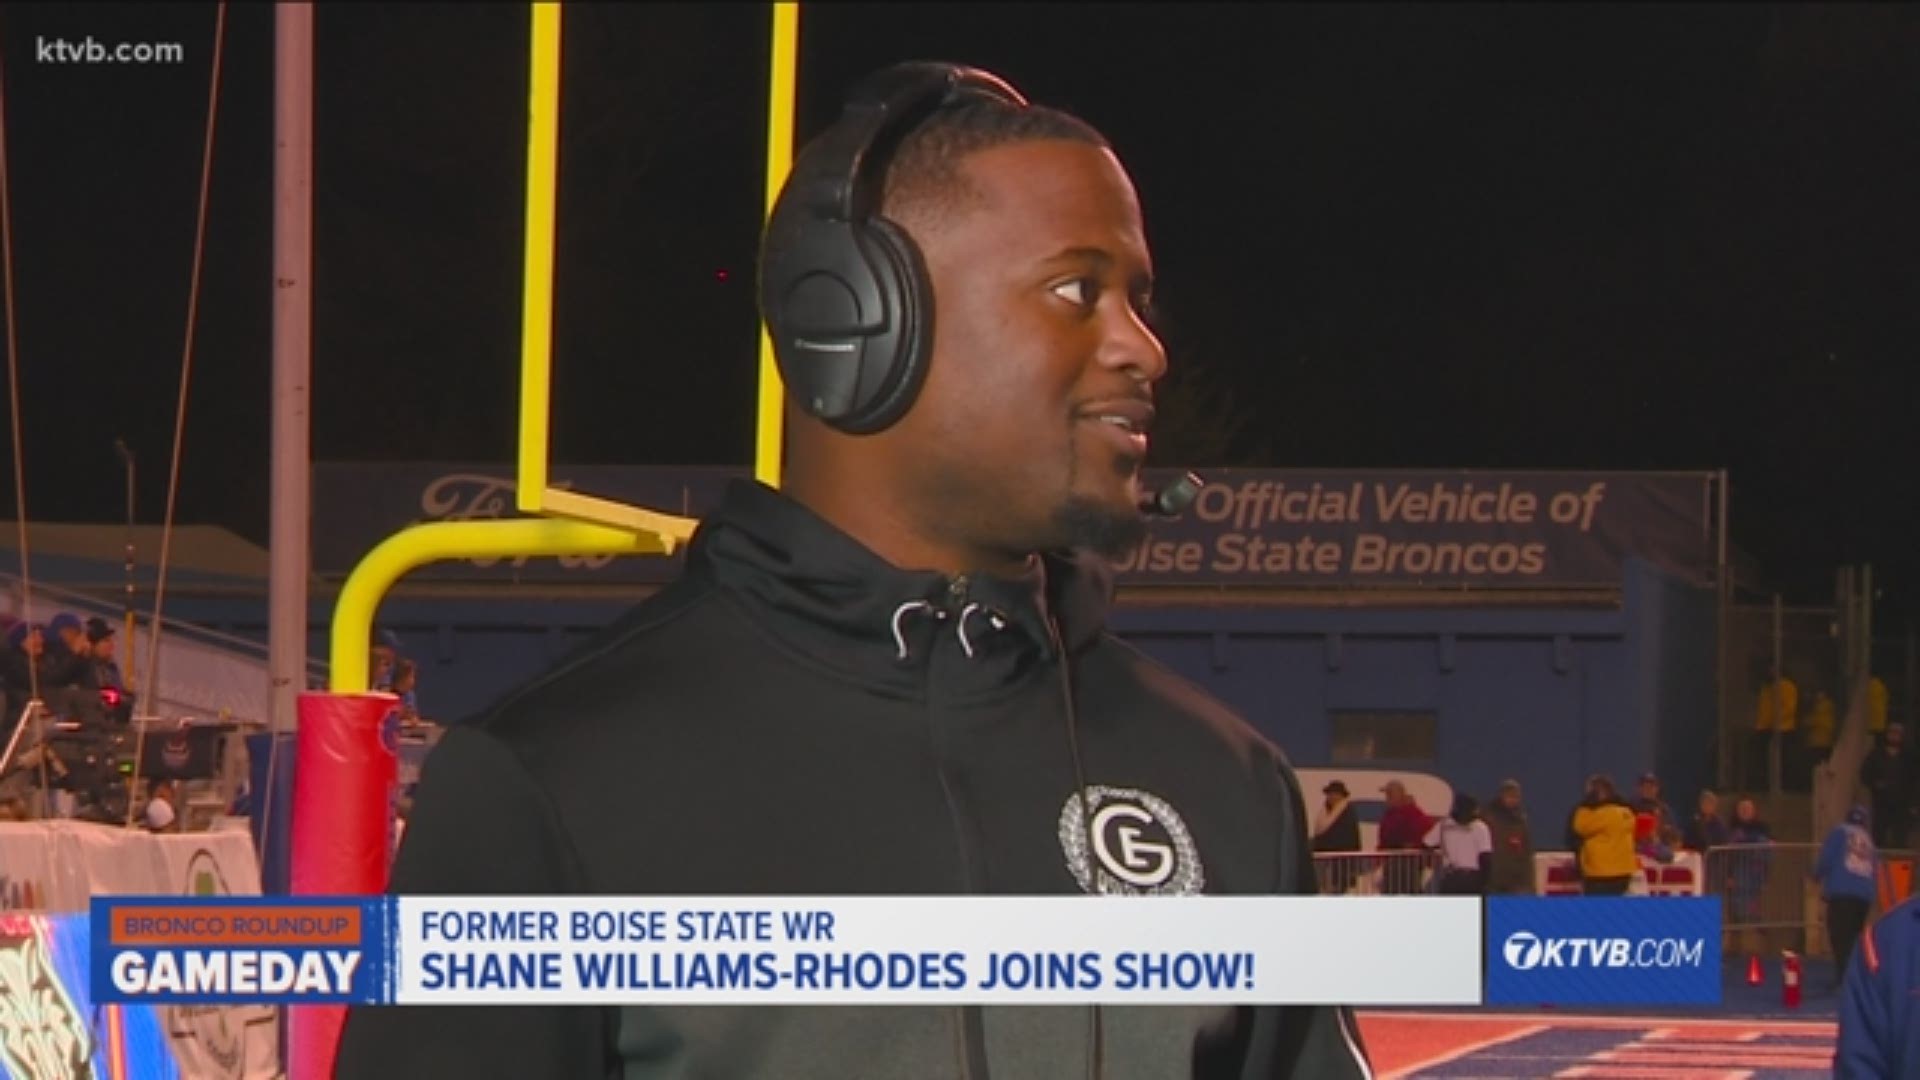 "People are hurt all the time," says former Boise State WR Shane Williams-Rhodes when talking about why more details about player injuries shouldn't be public.